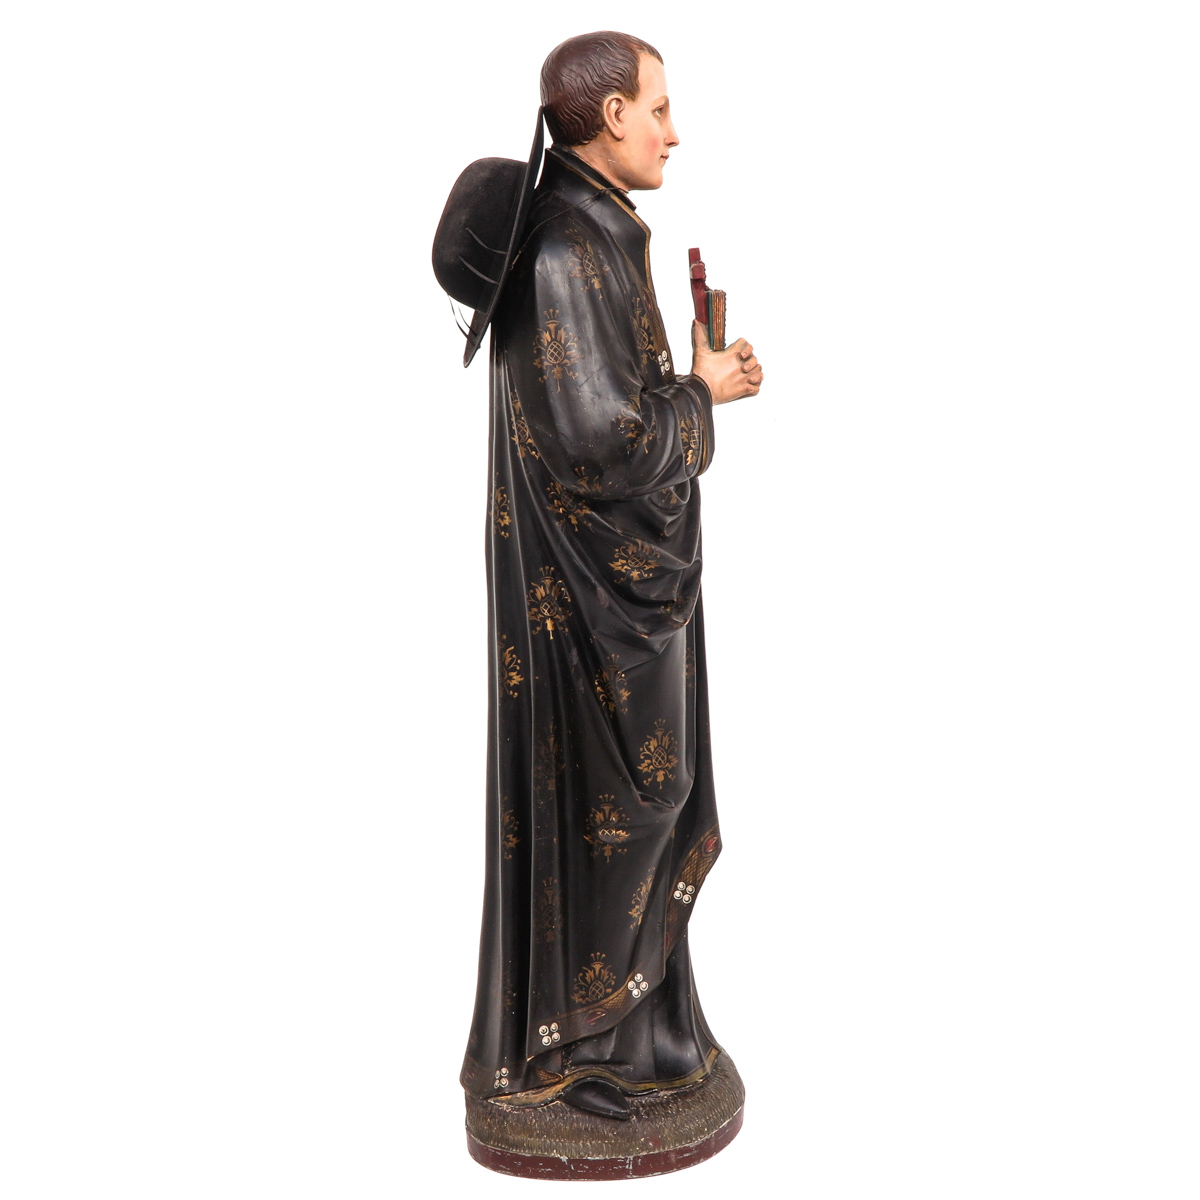 A 19th Cetury Sculpture of Priest - Image 4 of 10